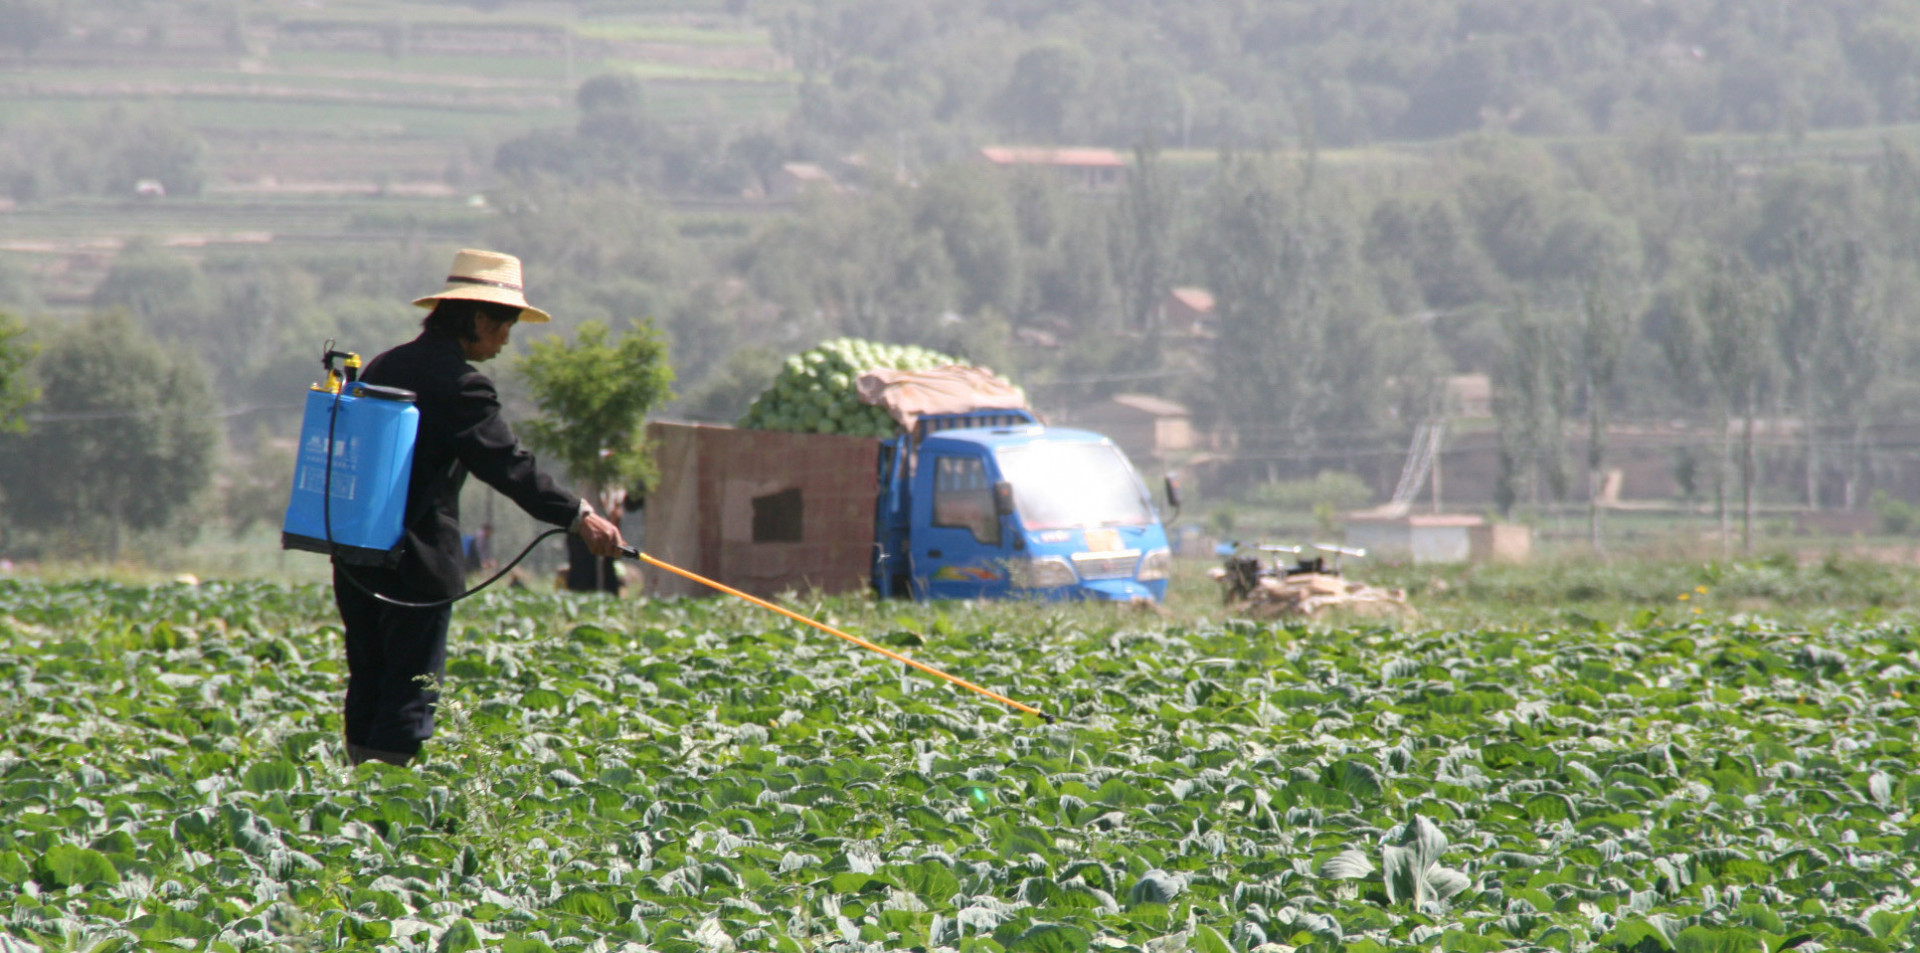 A woman wearing a blue tank on her back sprays crops in a field holding a long pole. 